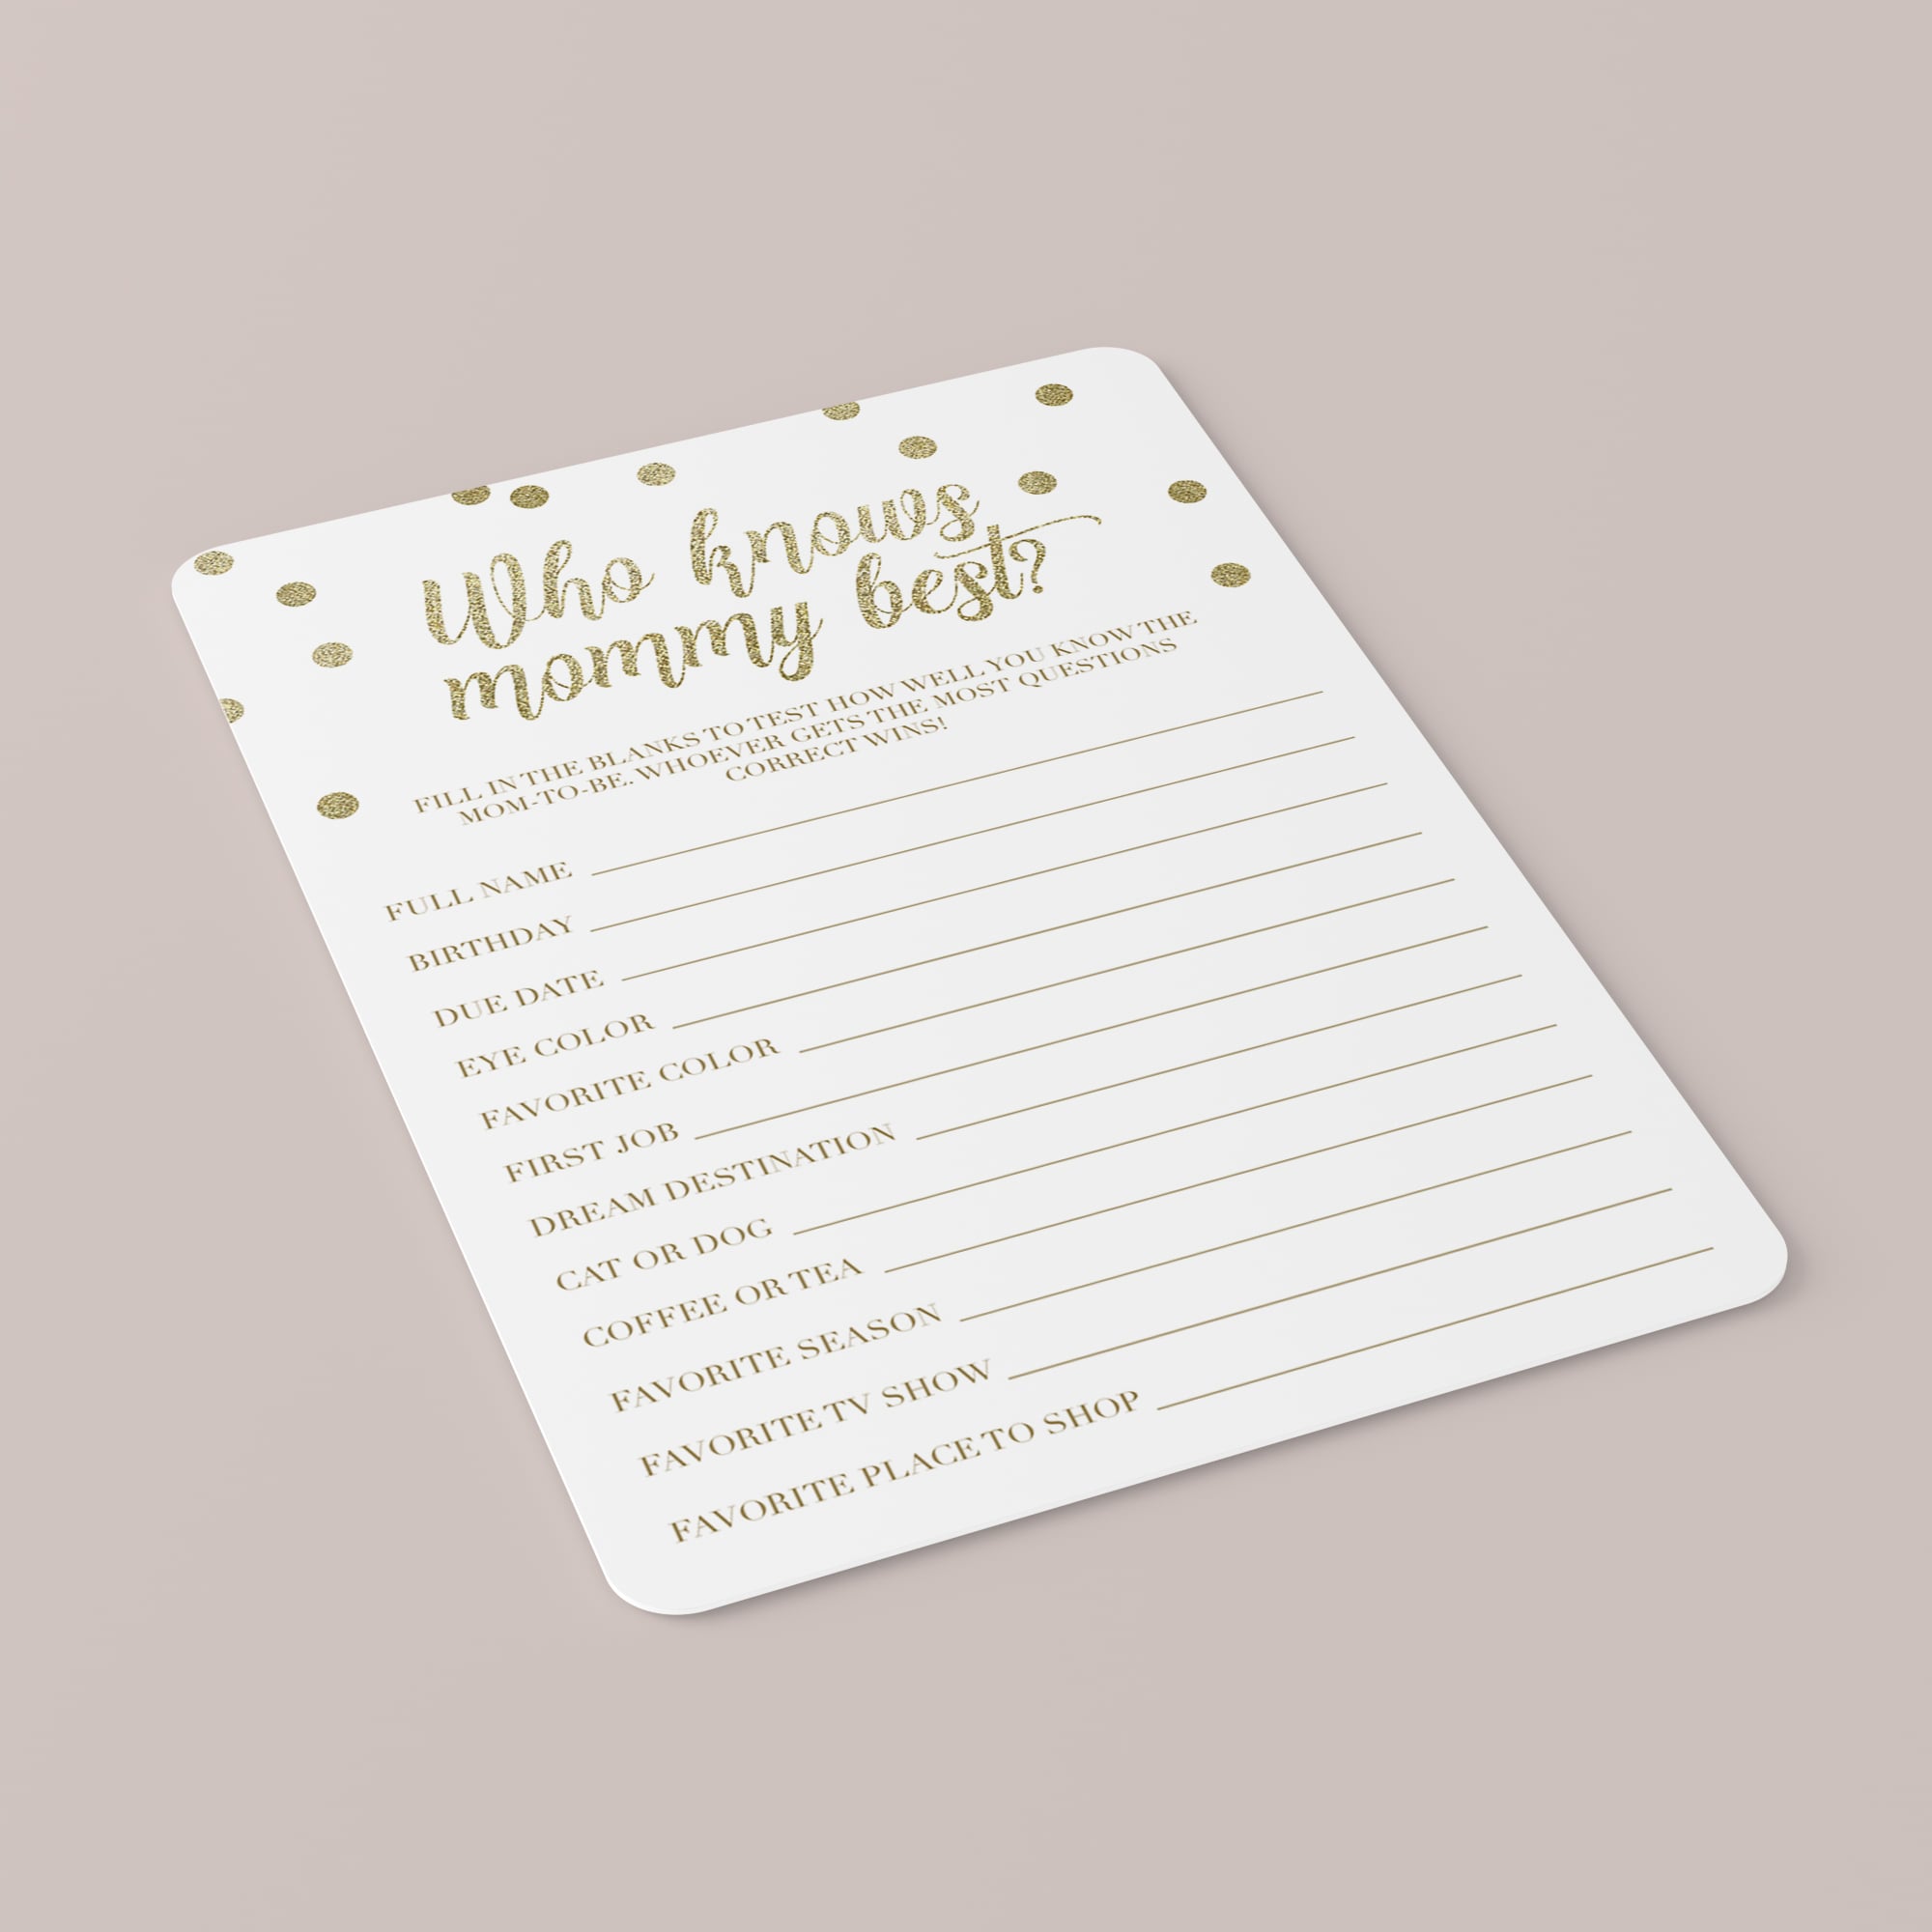 Who knows mommy best games for baby shower by LittleSizzle